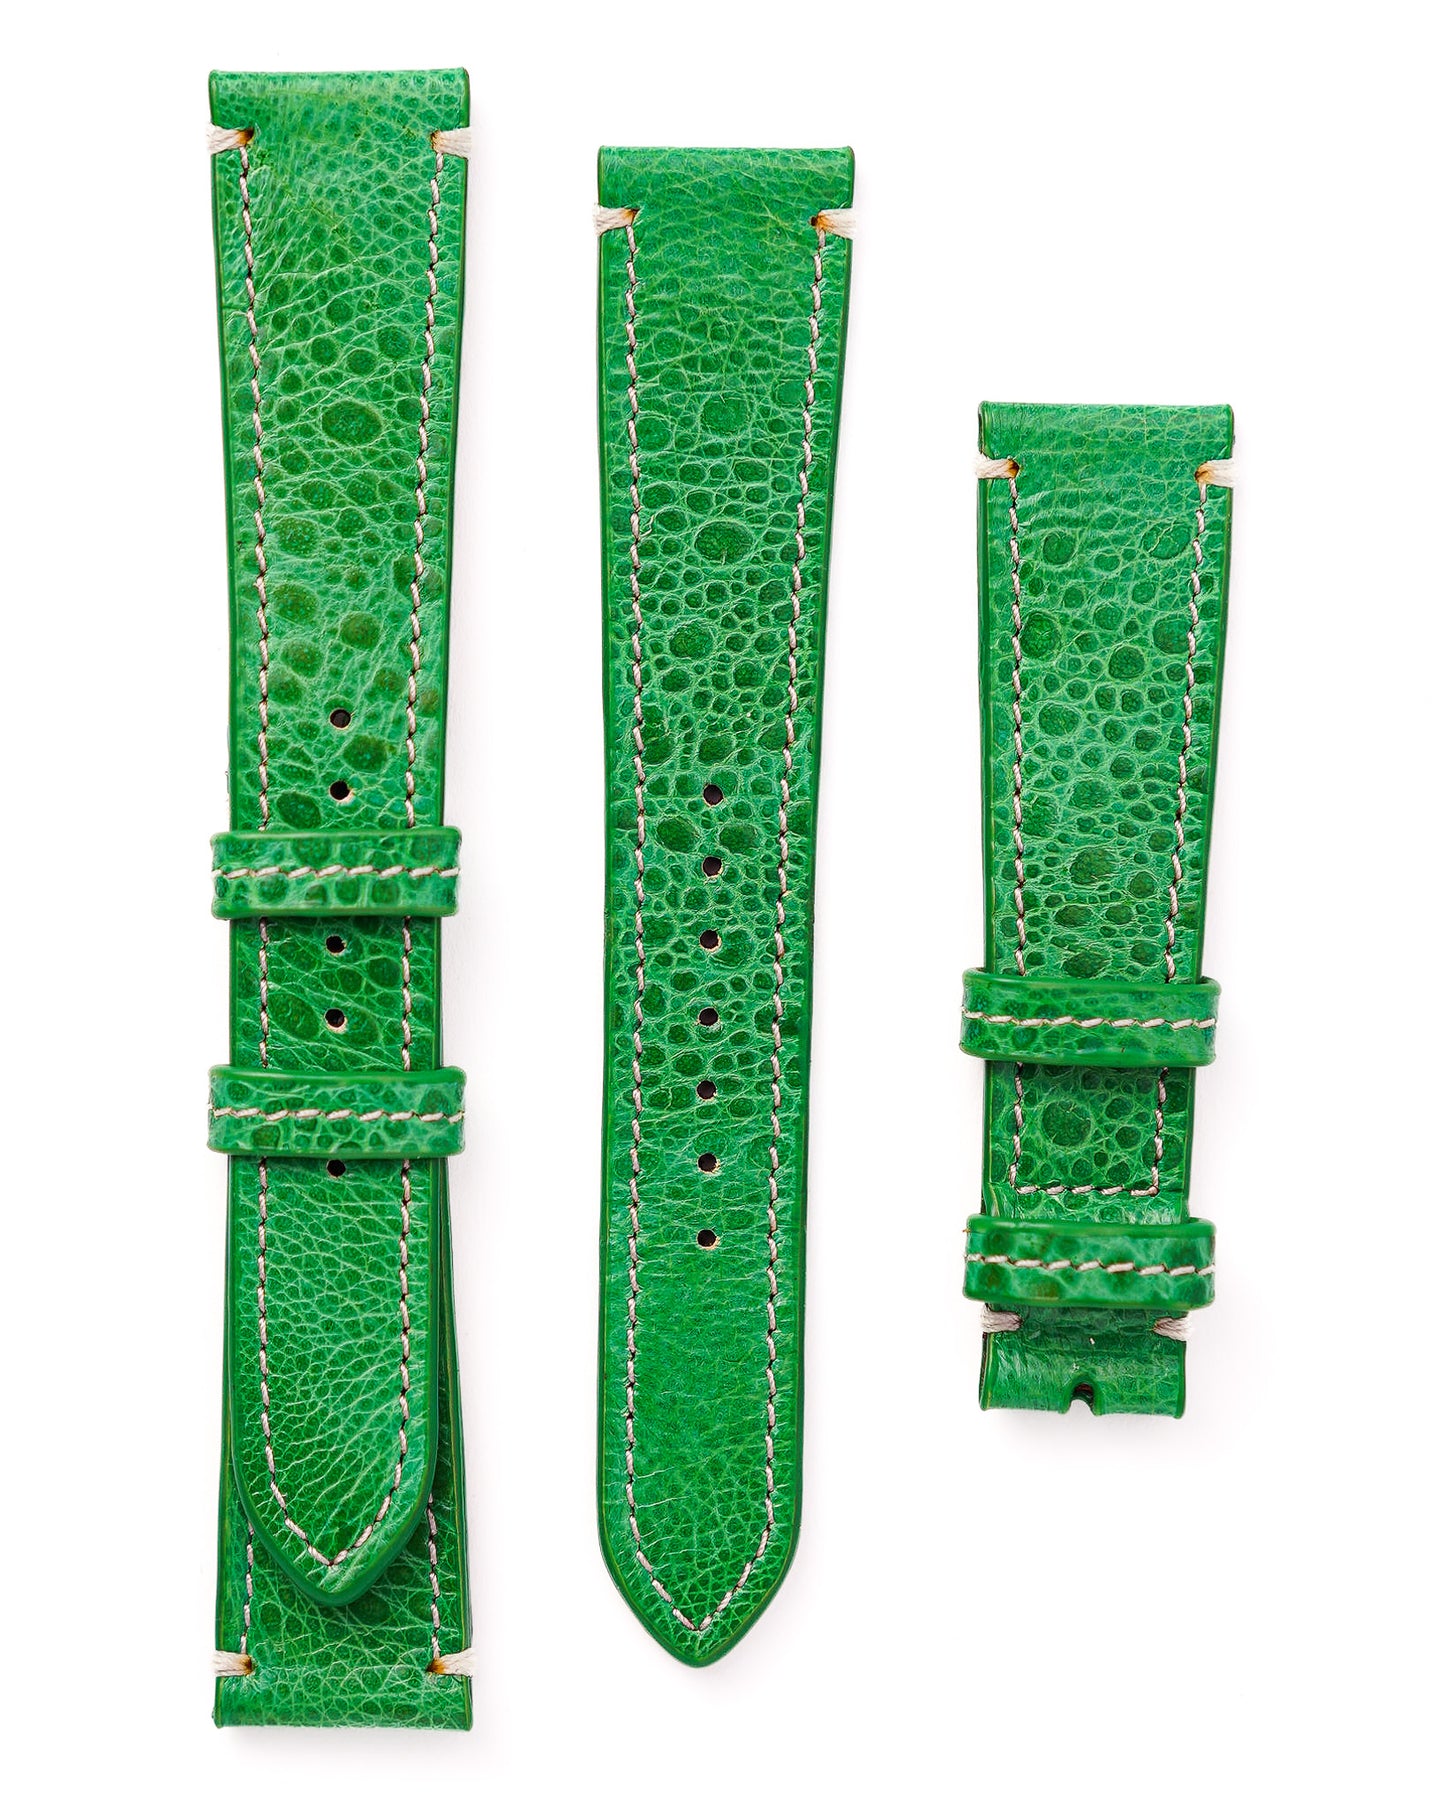 Cane Toad Leather Watch Strap - Bright Green